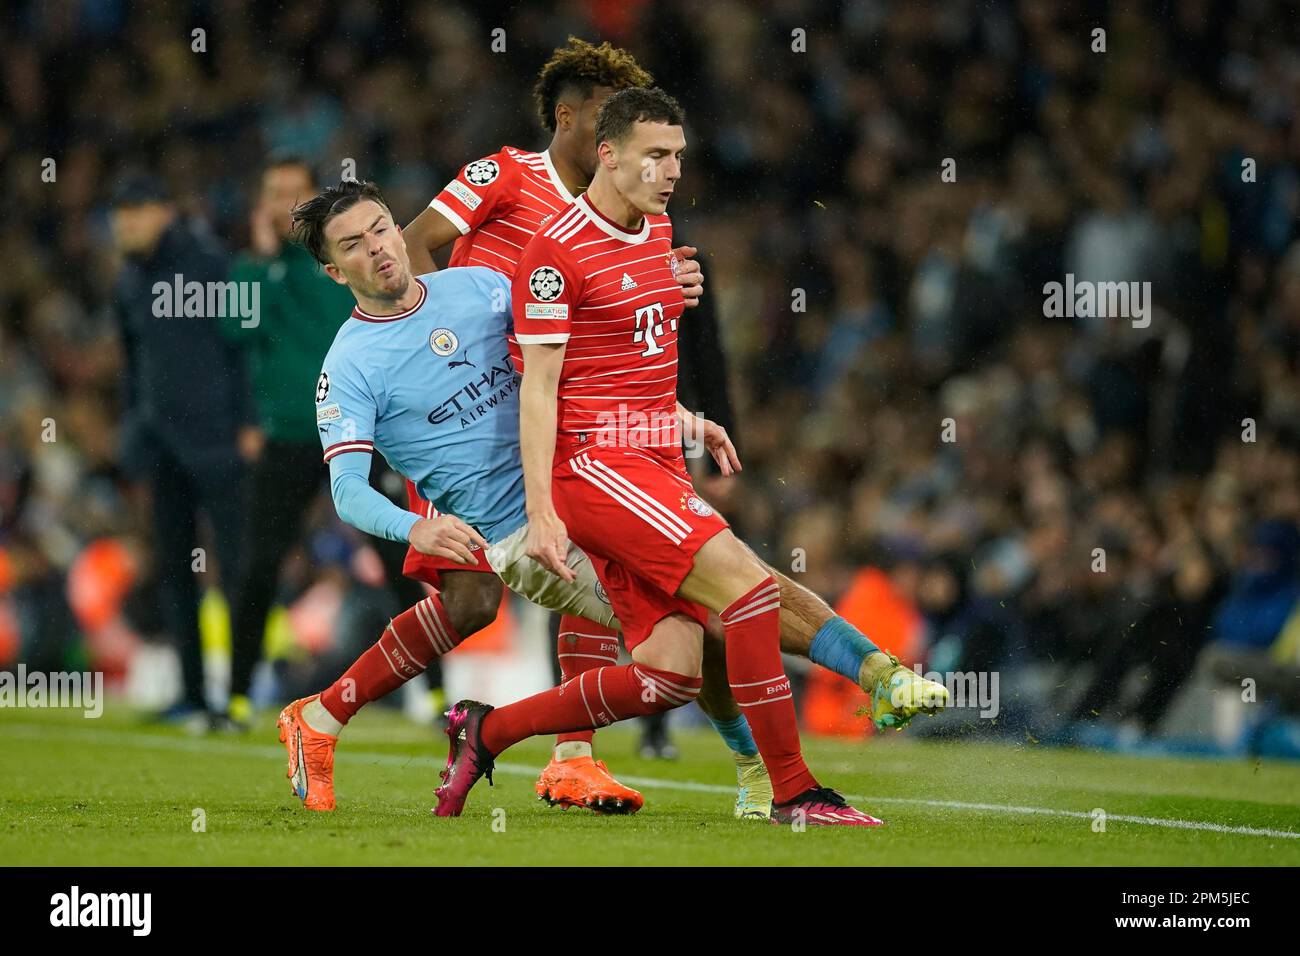 Bayern's Benjamin Pavard, right, and Kingsley Coman stop Manchester City's Jack Grealish during the Champions League quarterfinal, first leg, soccer match between Manchester City and Bayern Munich at the Etihad stadium in Manchester, England, Tuesday, April 11, 2023. (AP Photo/Dave Thompson) Banque D'Images